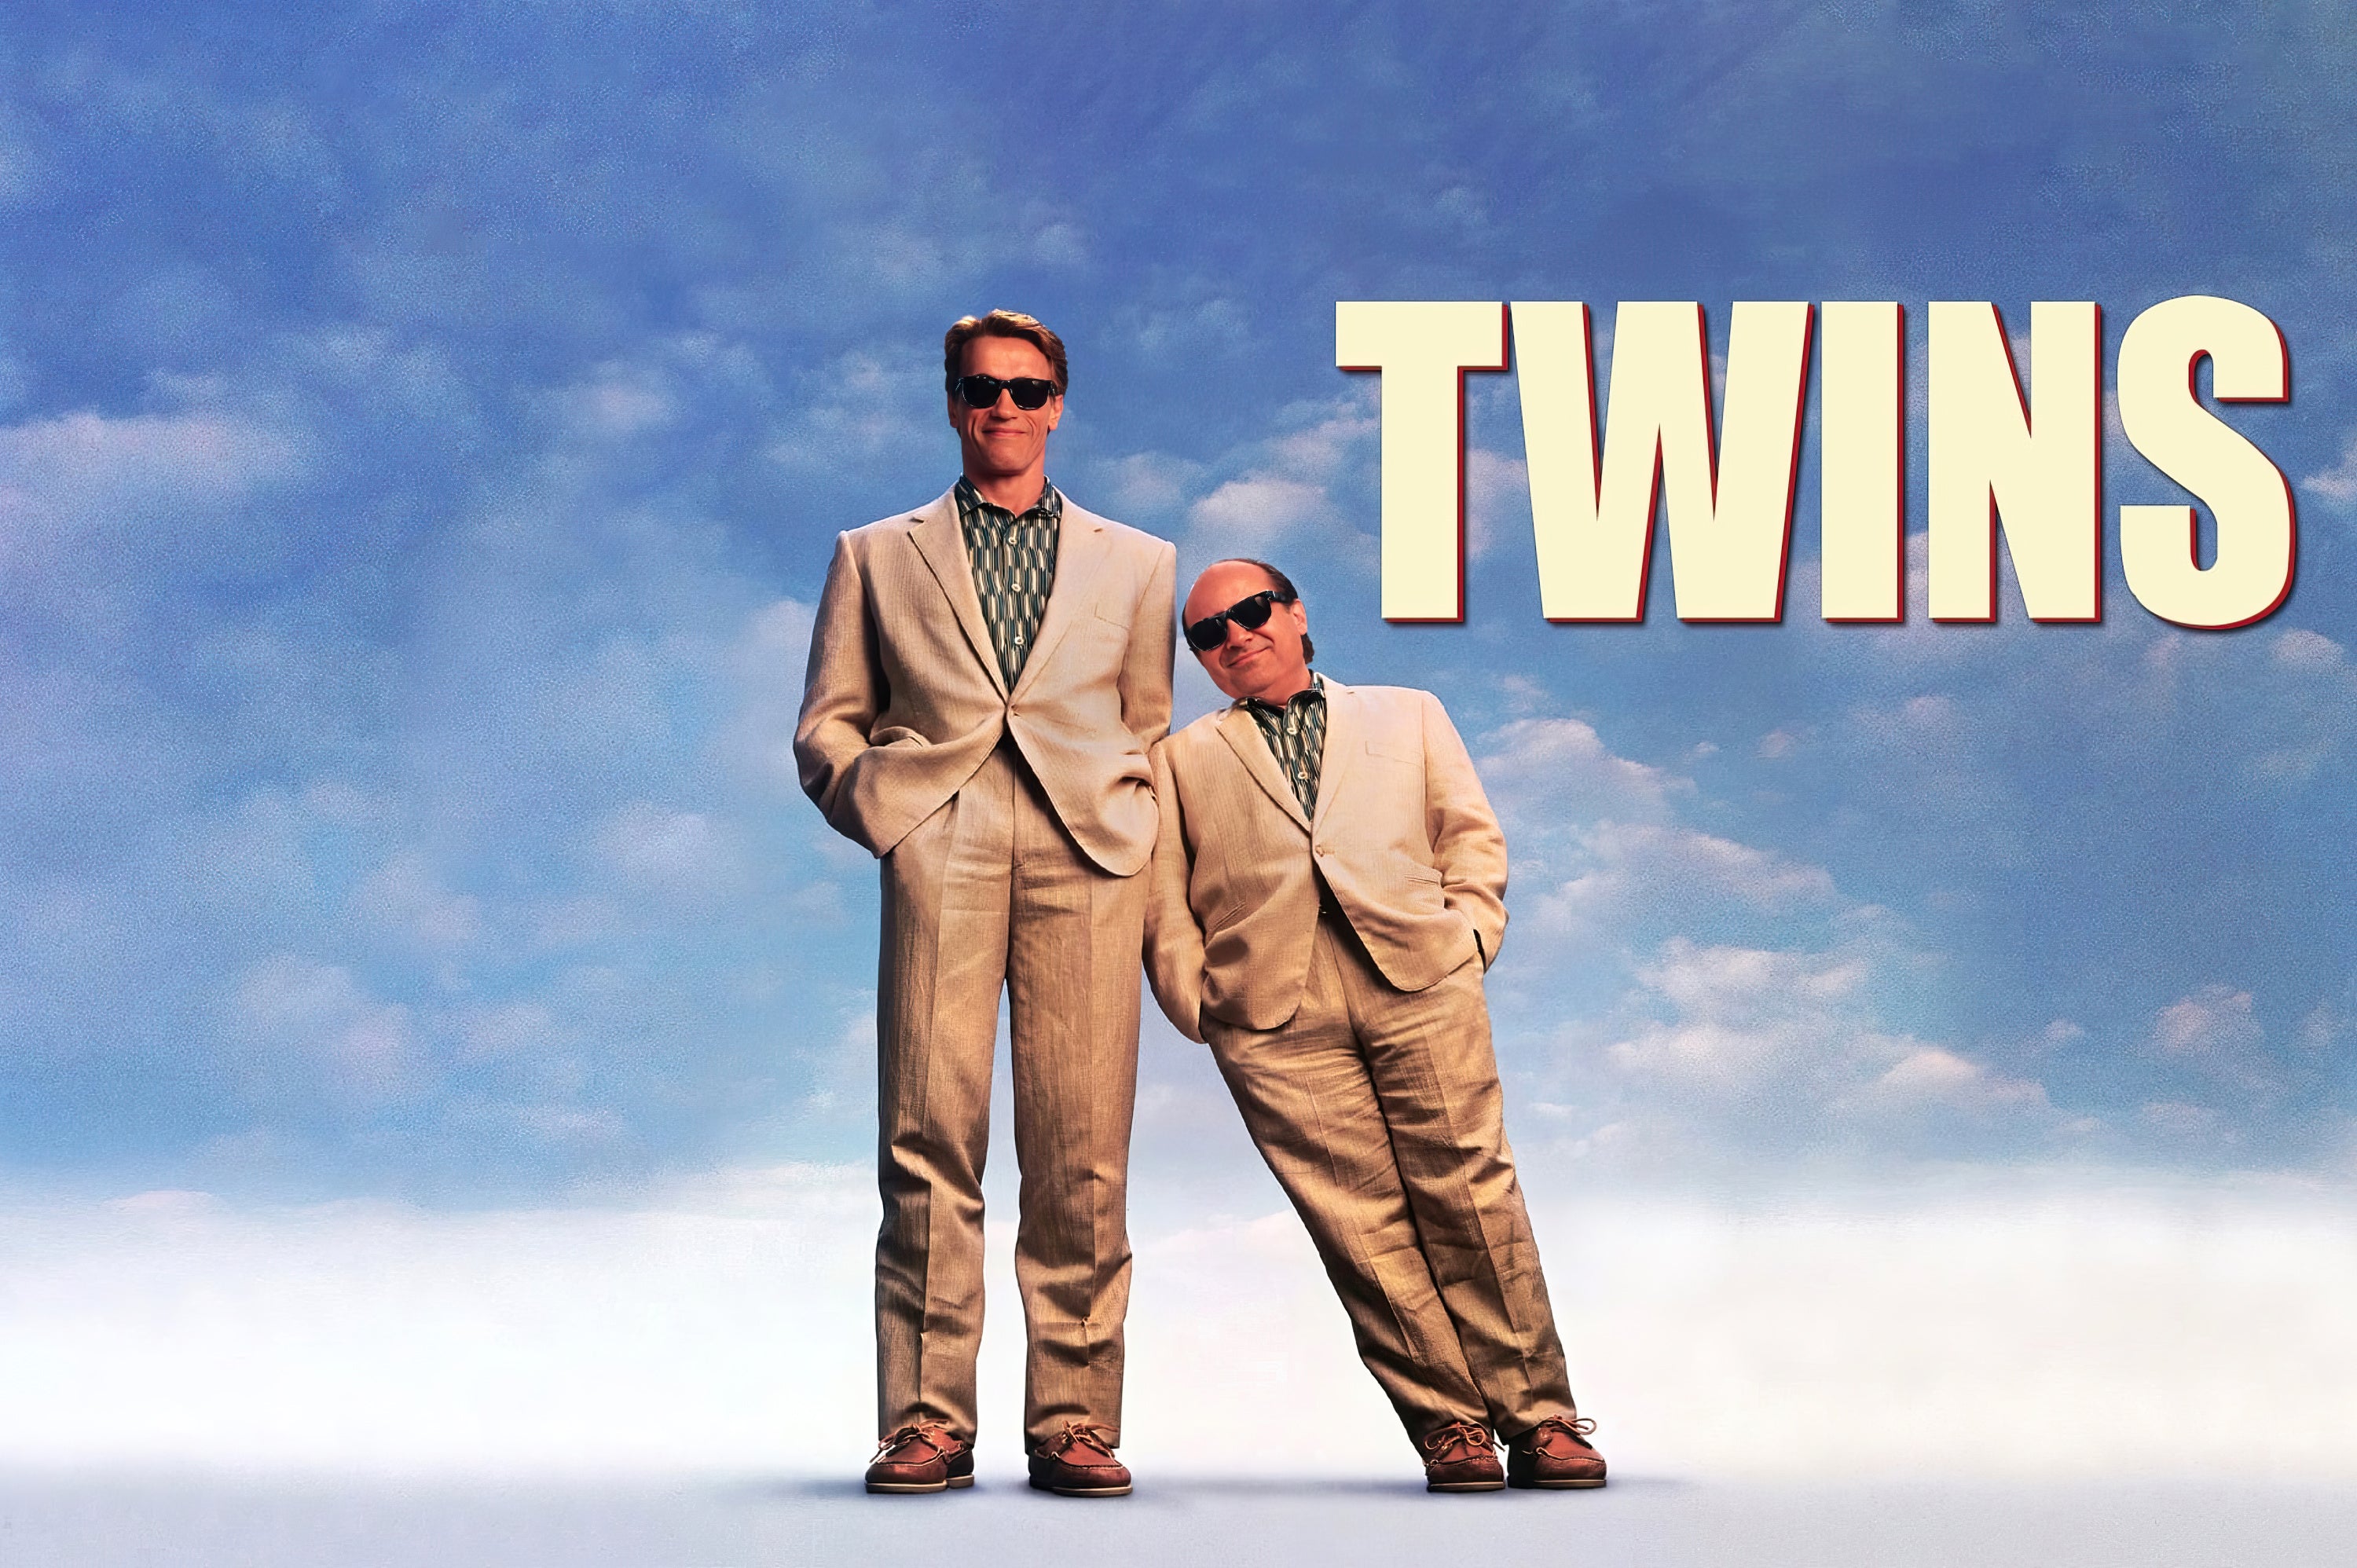 Twins Script Screenplay - Image of Movie Poster